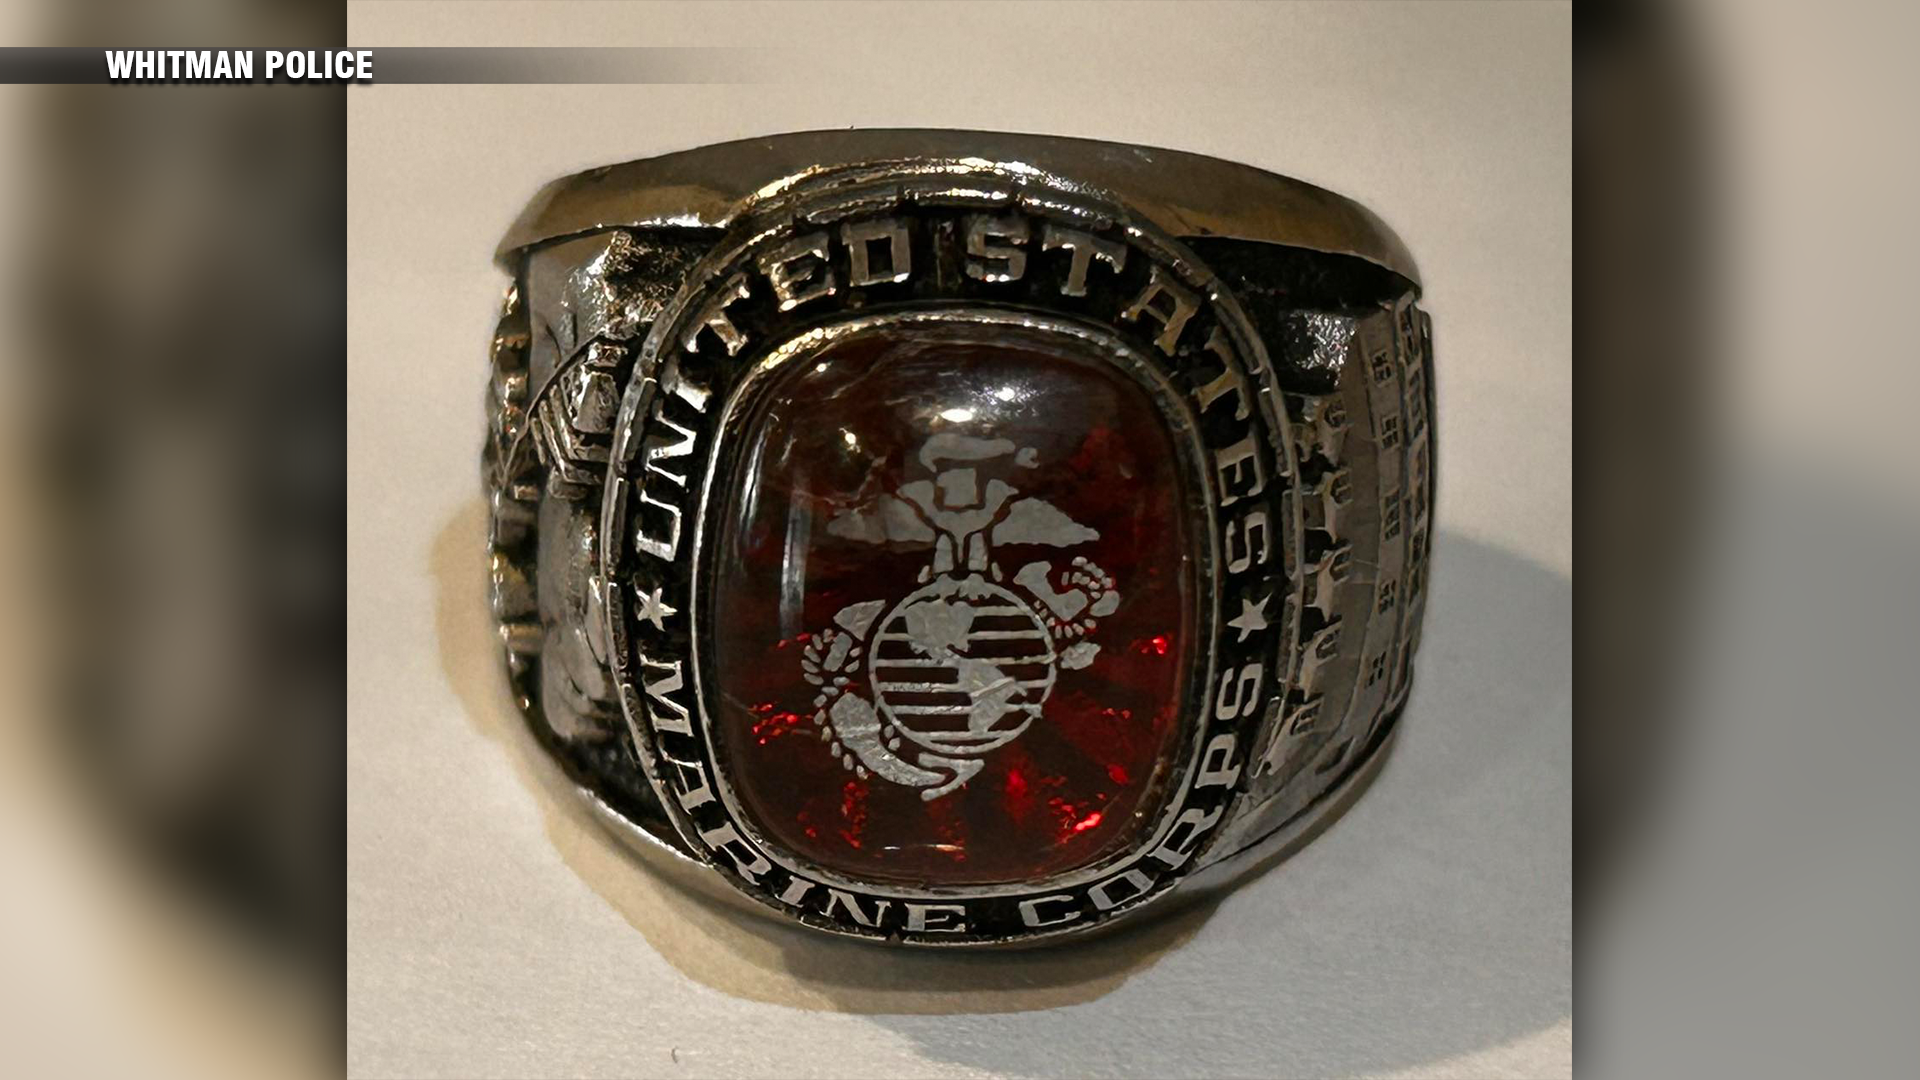 Whitman police look to reunite lost Marine Corps ring with its owner – Boston News, Weather, Sports